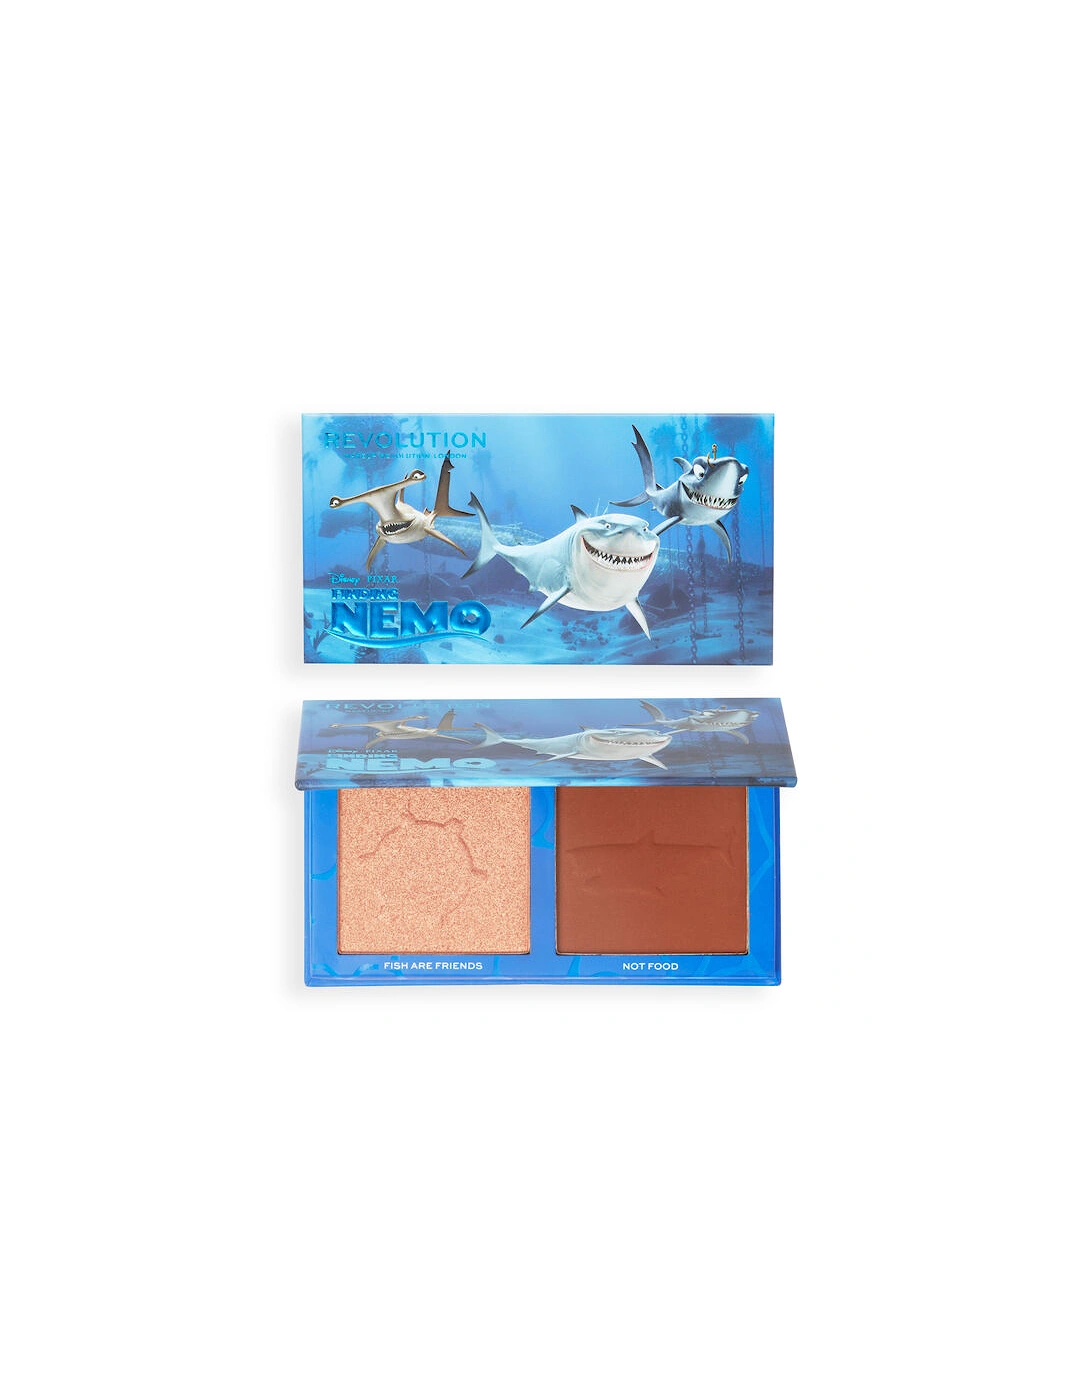 Disney Pixar’s Finding Nemo and Fish Are Friends Bronzer and Highlighter Palette, 2 of 1